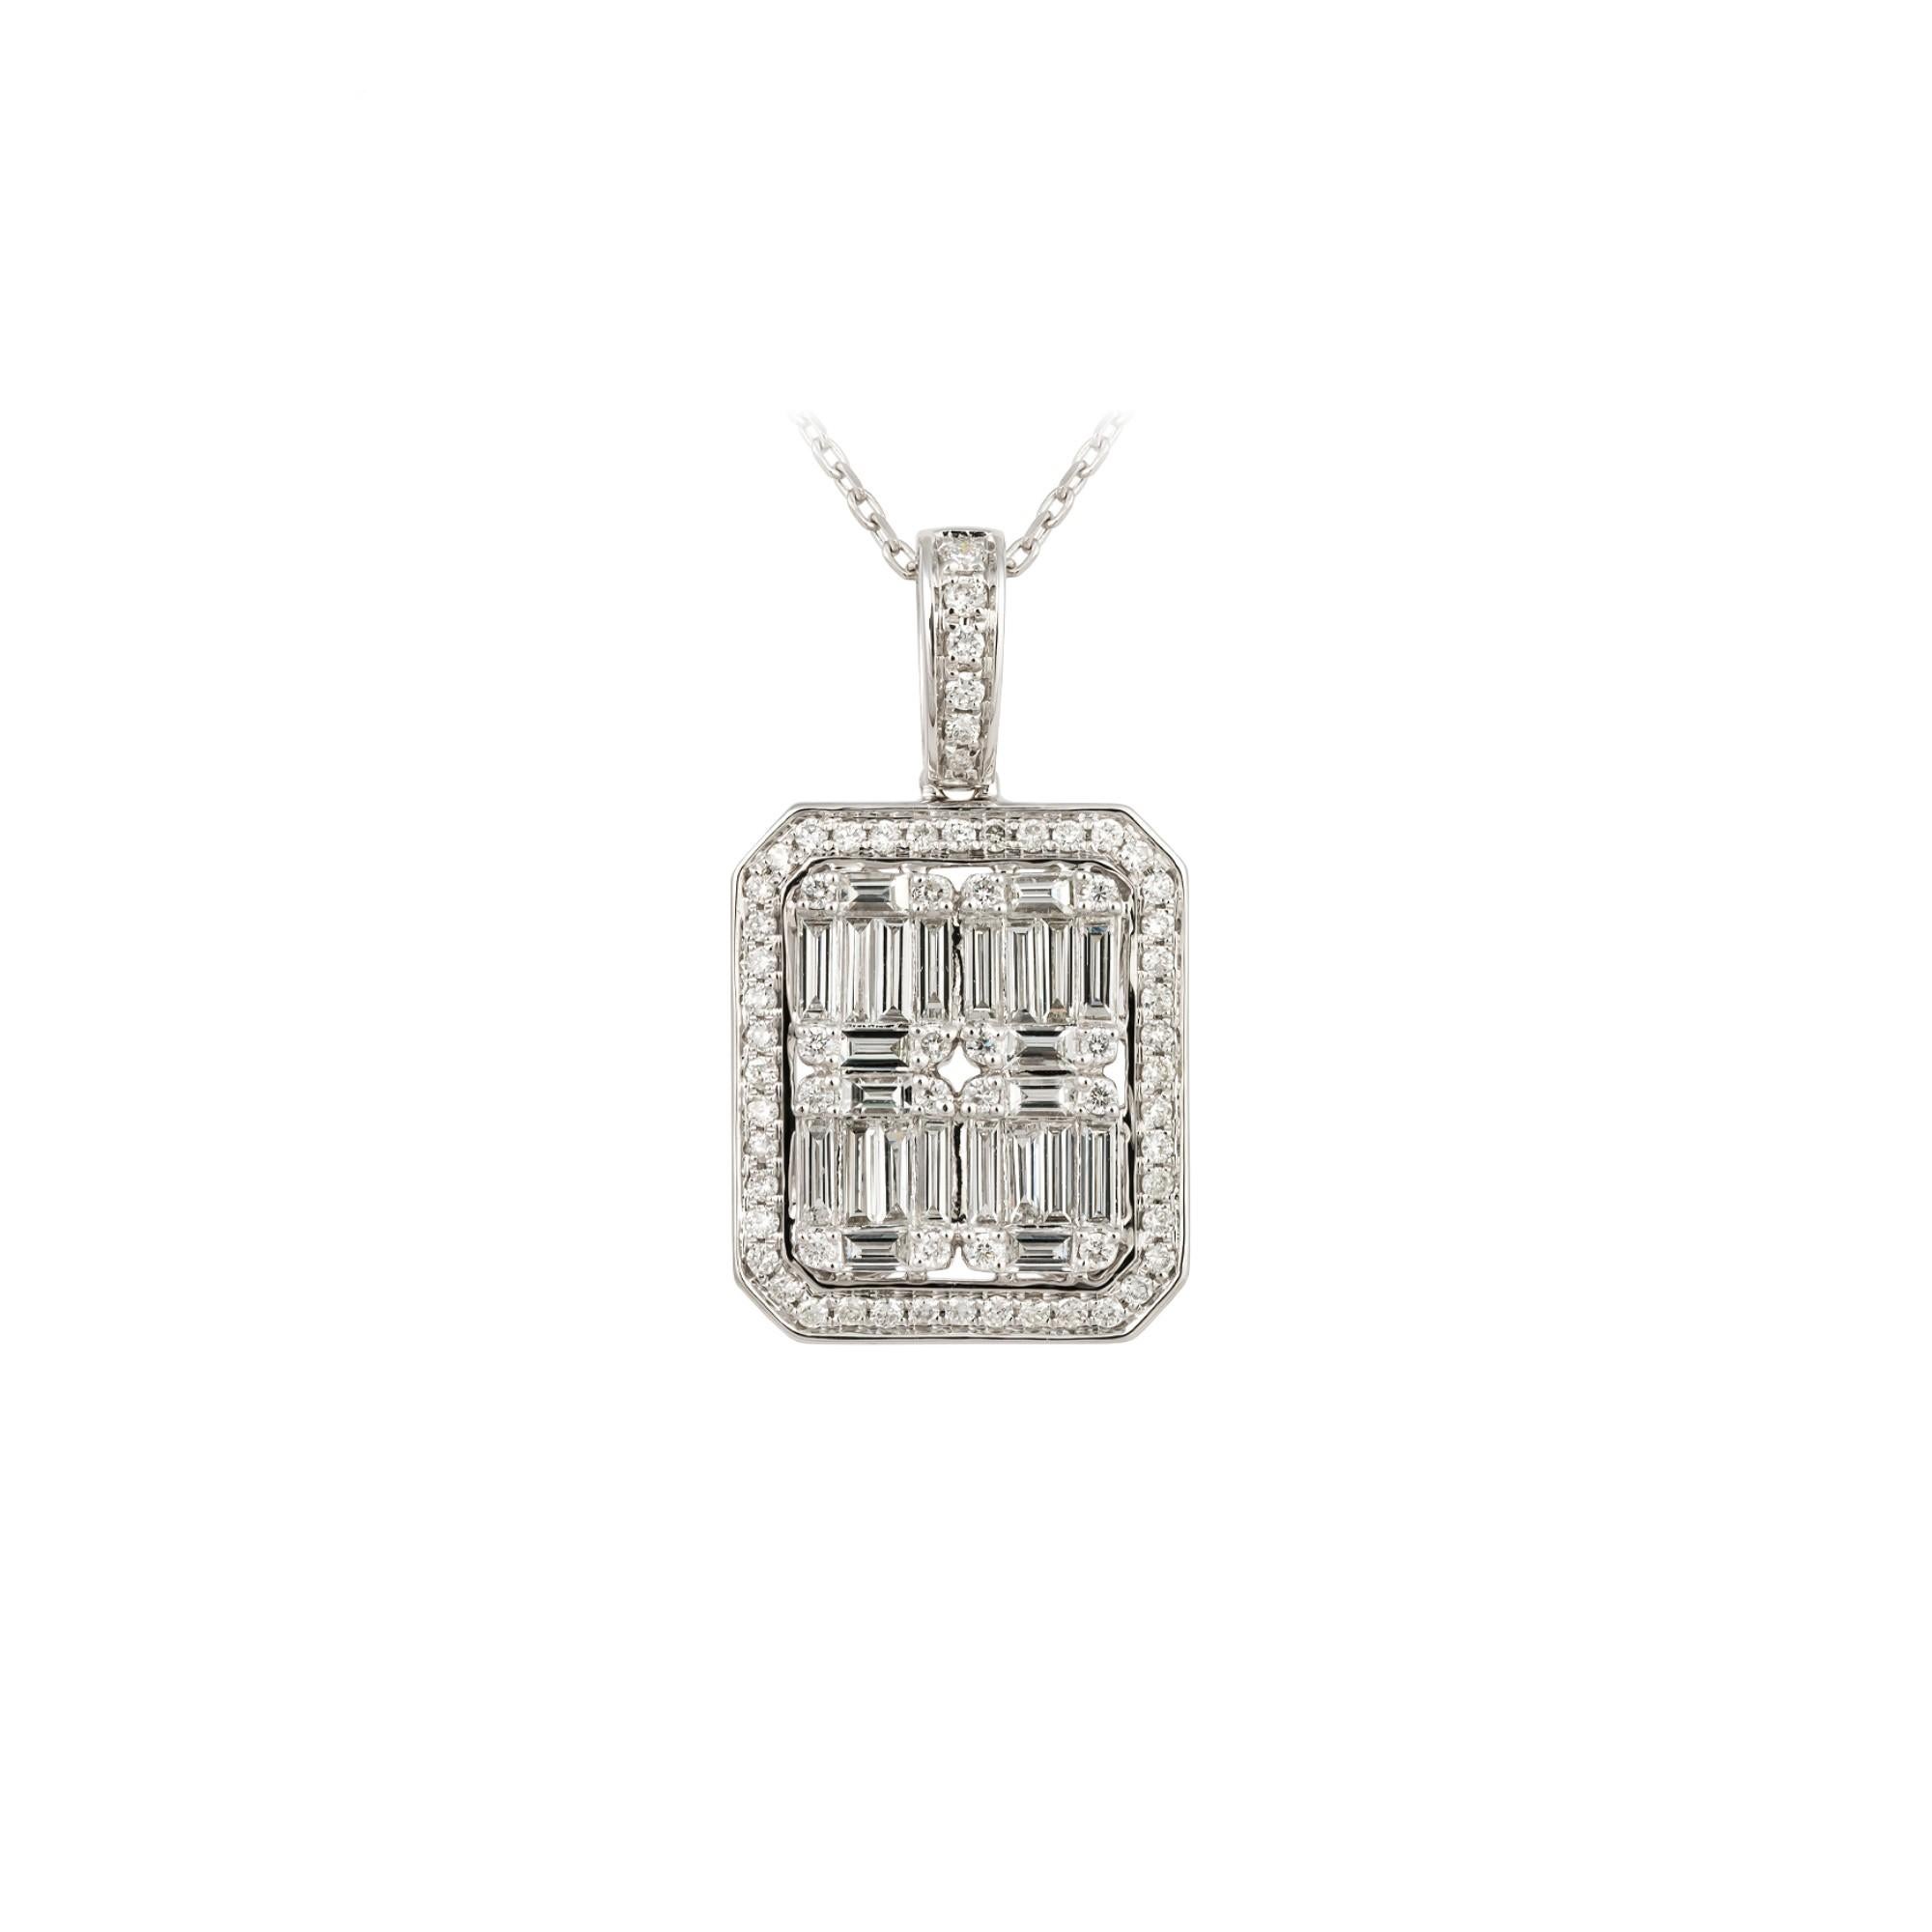 The Following Item we are offering is a Rare Important Radiant 18KT Gold Rare Gorgeous Fancy Baguette Diamond Pendant Necklace. Necklace is comprised of a Gorgeous Fancy Baguette Cut Trillion Cut Diamonds surrounded and adorned with a Beautiful Halo